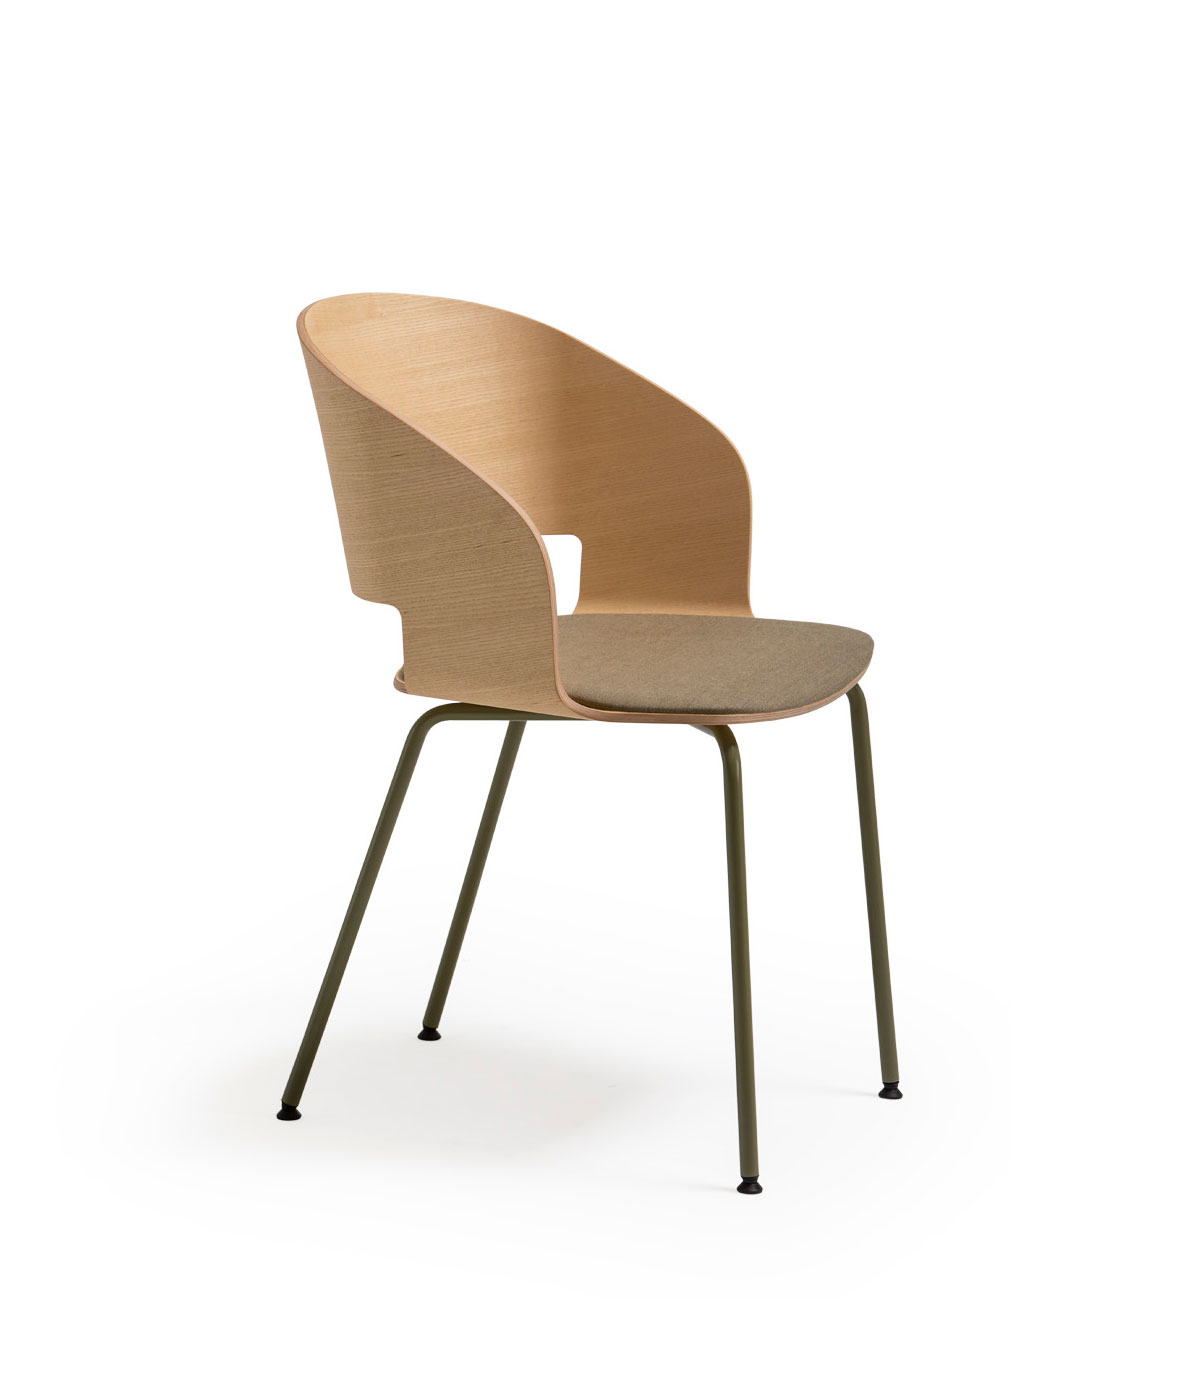 Goose chair Model A with armrests and metallic legs - Vergés